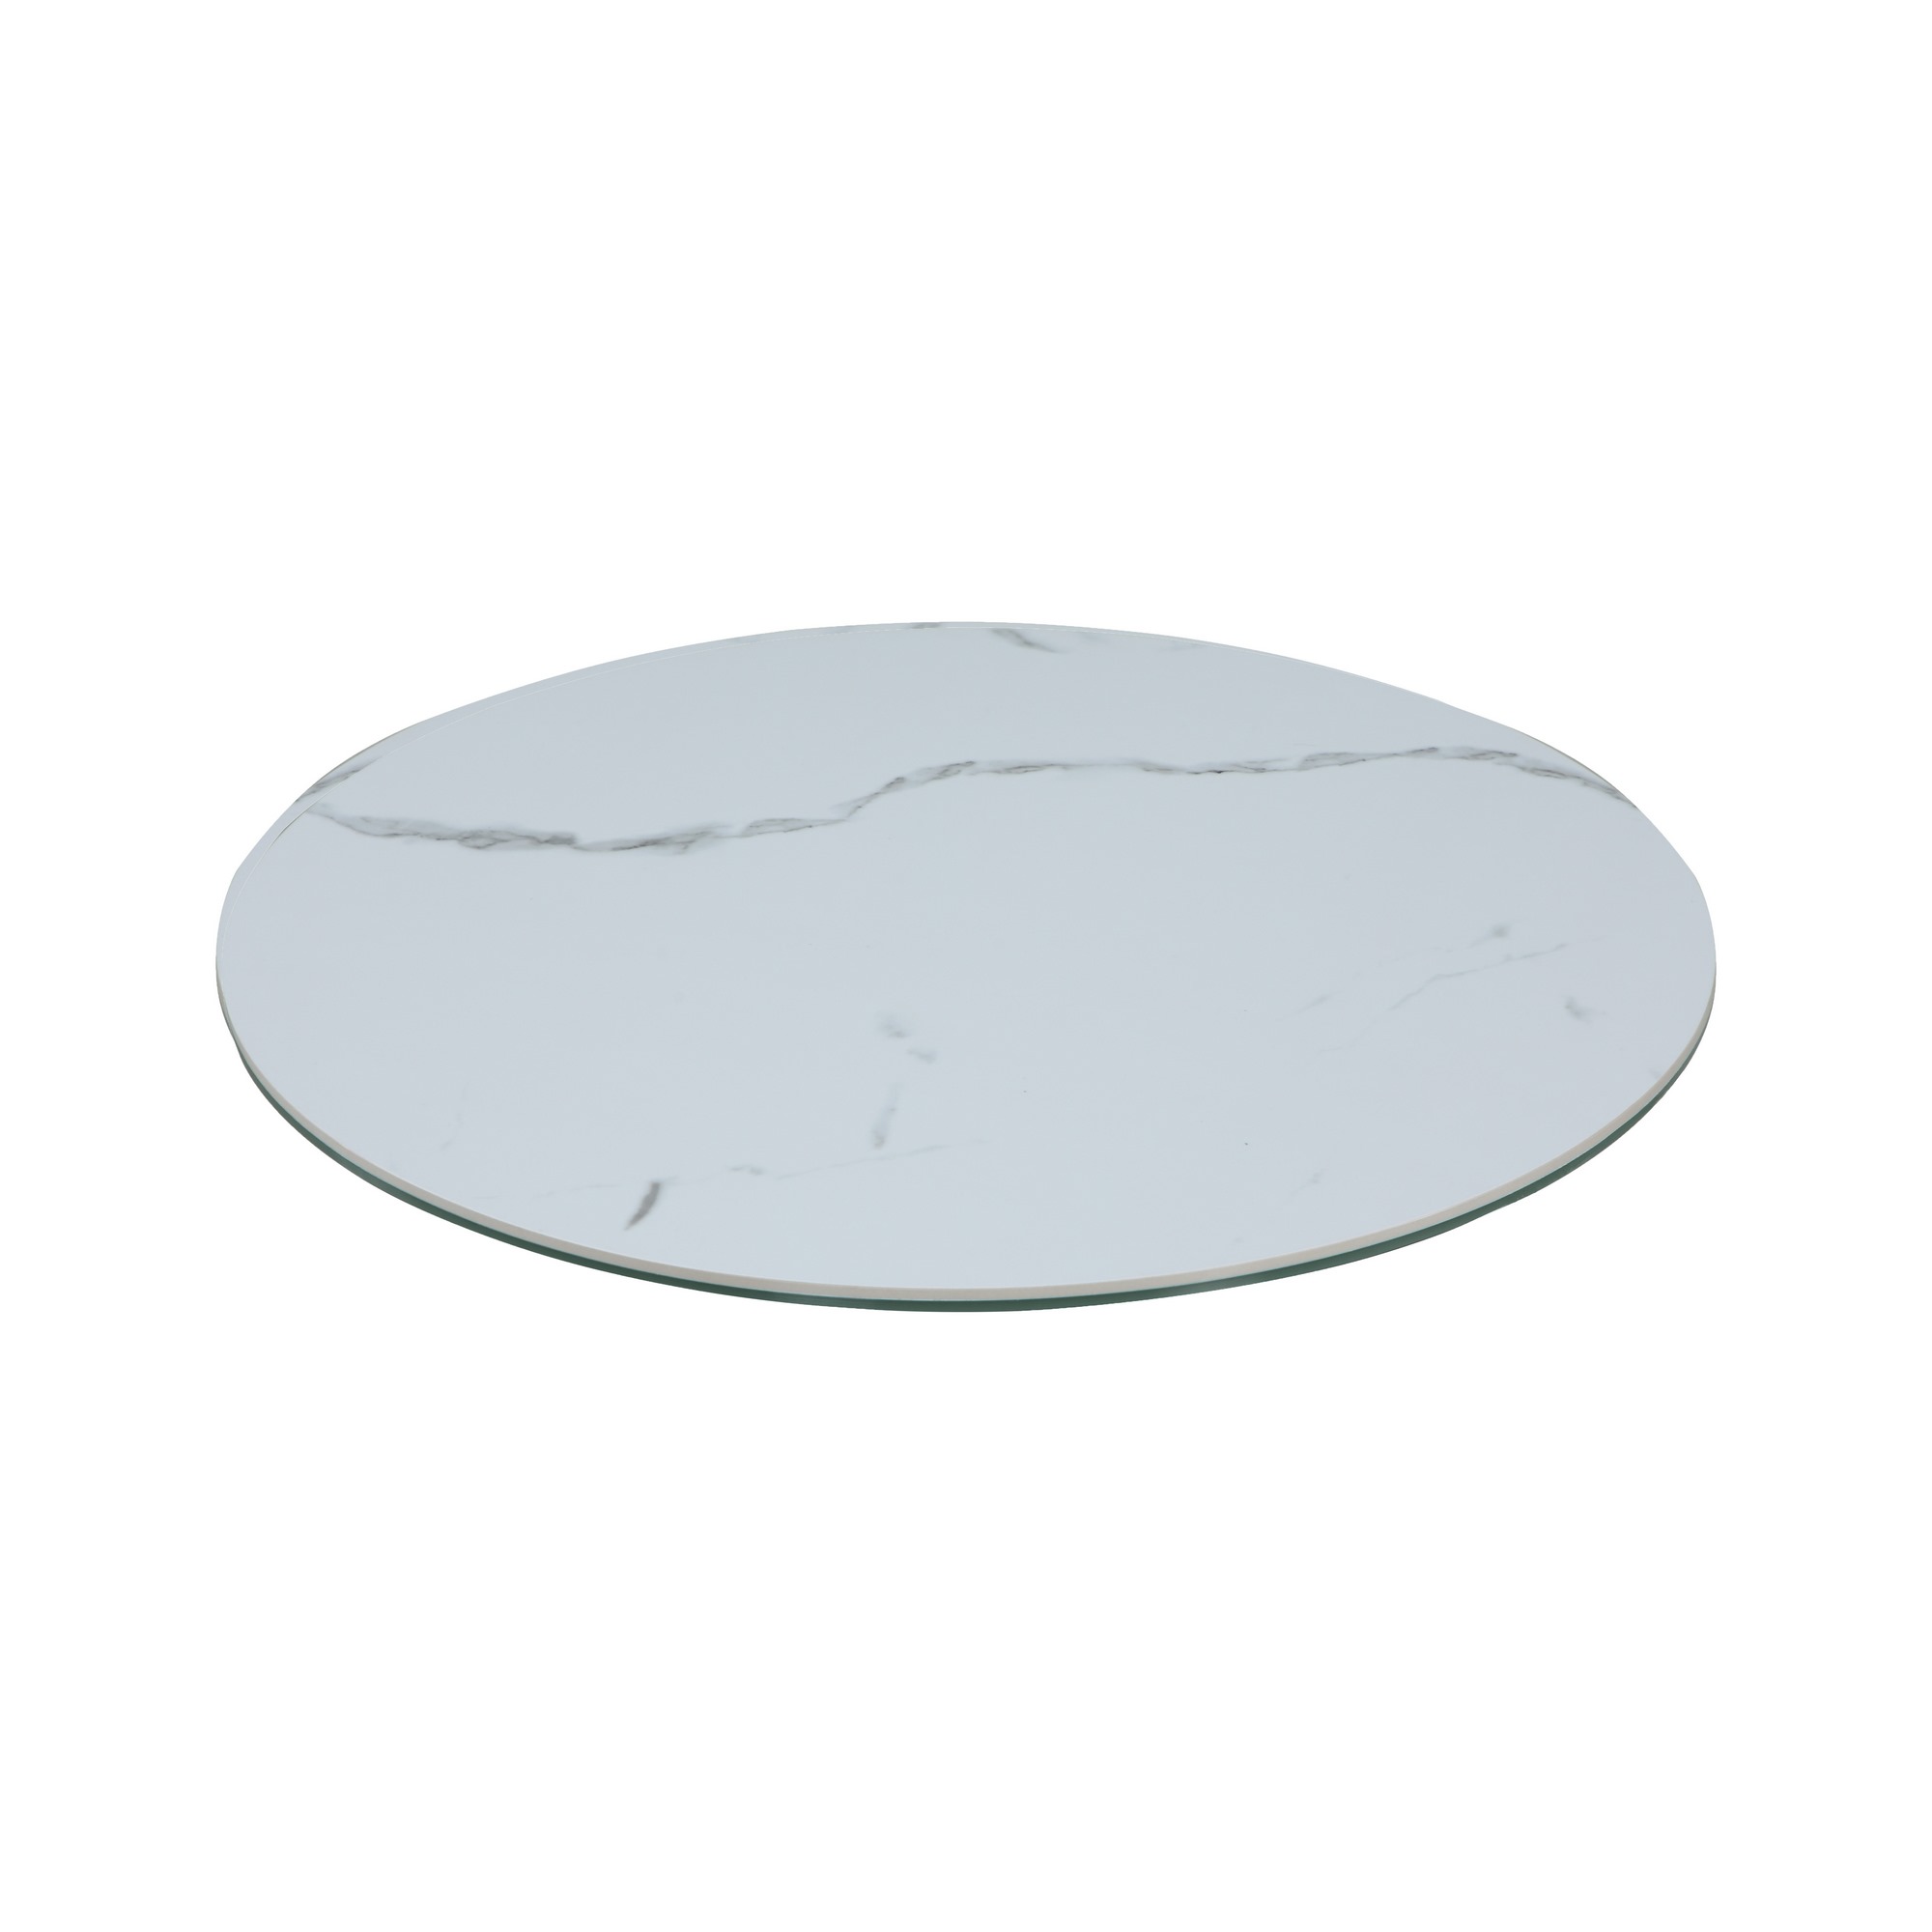 24” Round White Ceramic Lazy Susan by Chintaly Imports